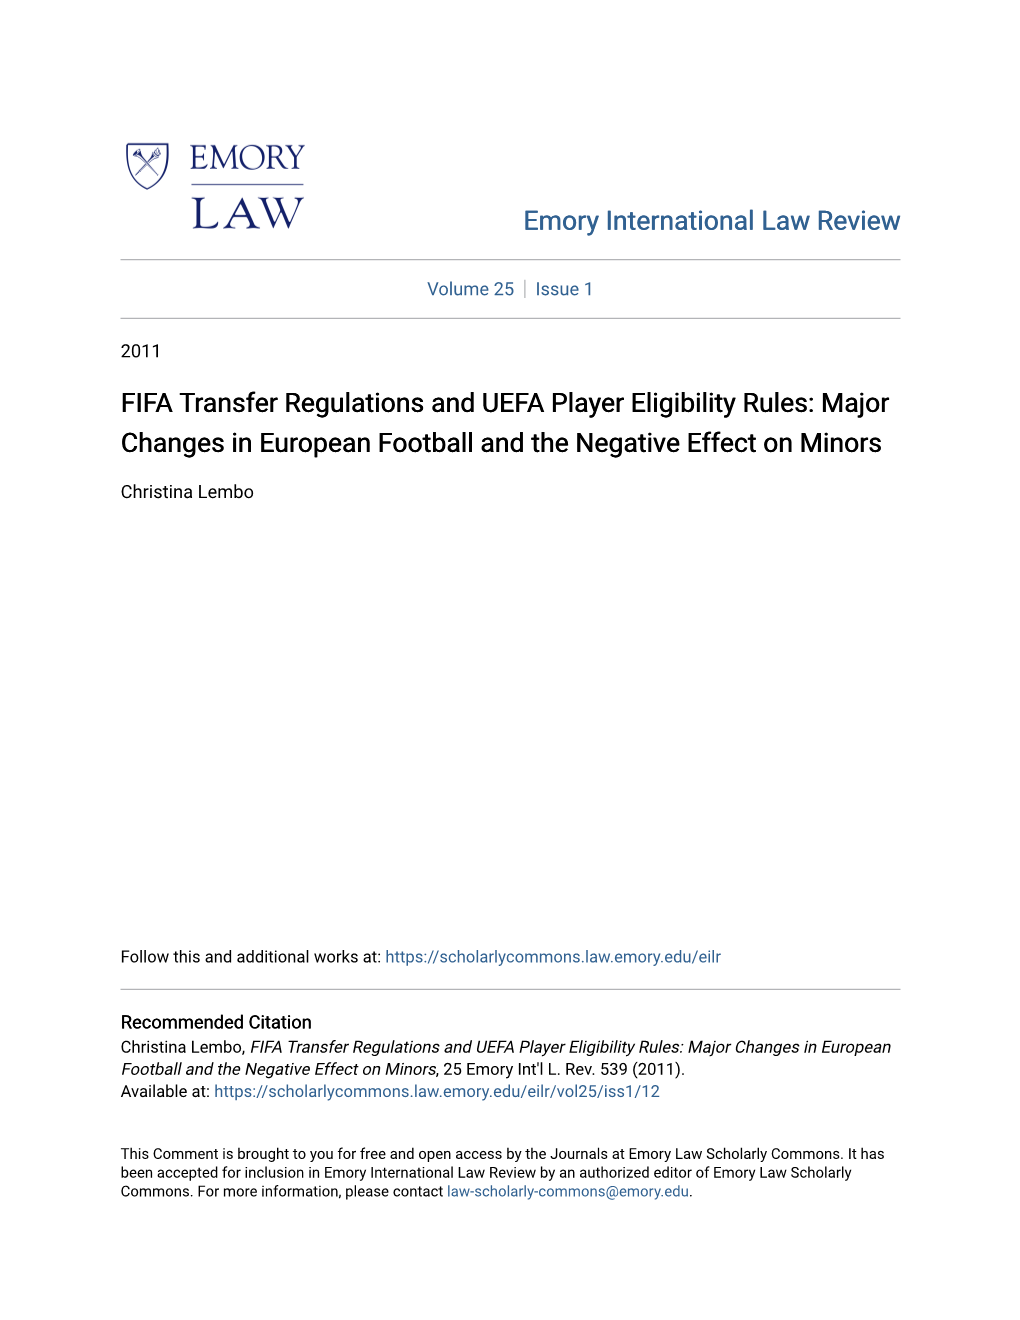 FIFA Transfer Regulations and UEFA Player Eligibility Rules: Major Changes in European Football and the Negative Effect on Minors